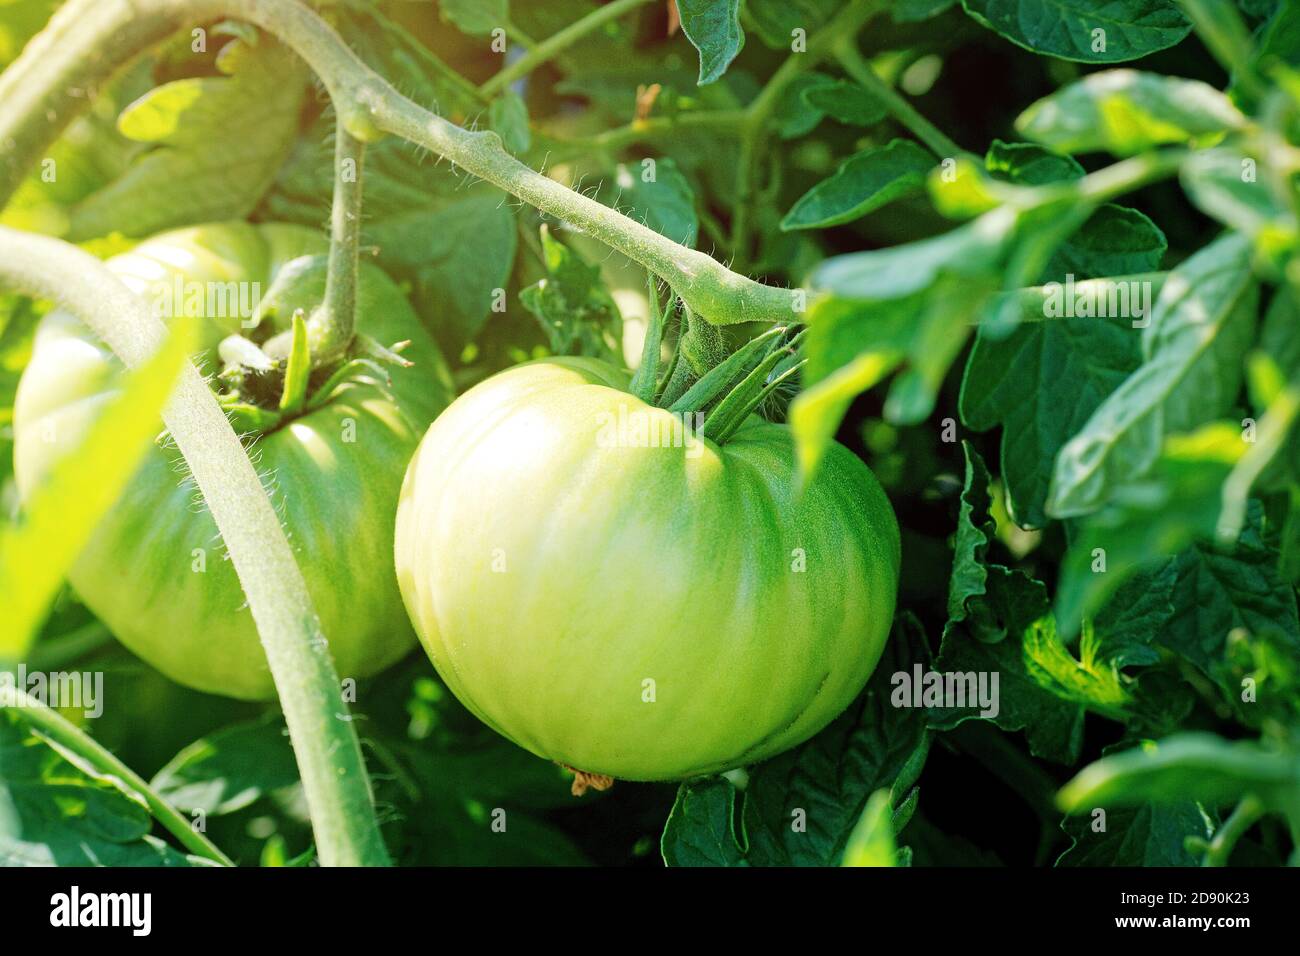 Green tomatoes hang on a stalk in the garden. Growing natural